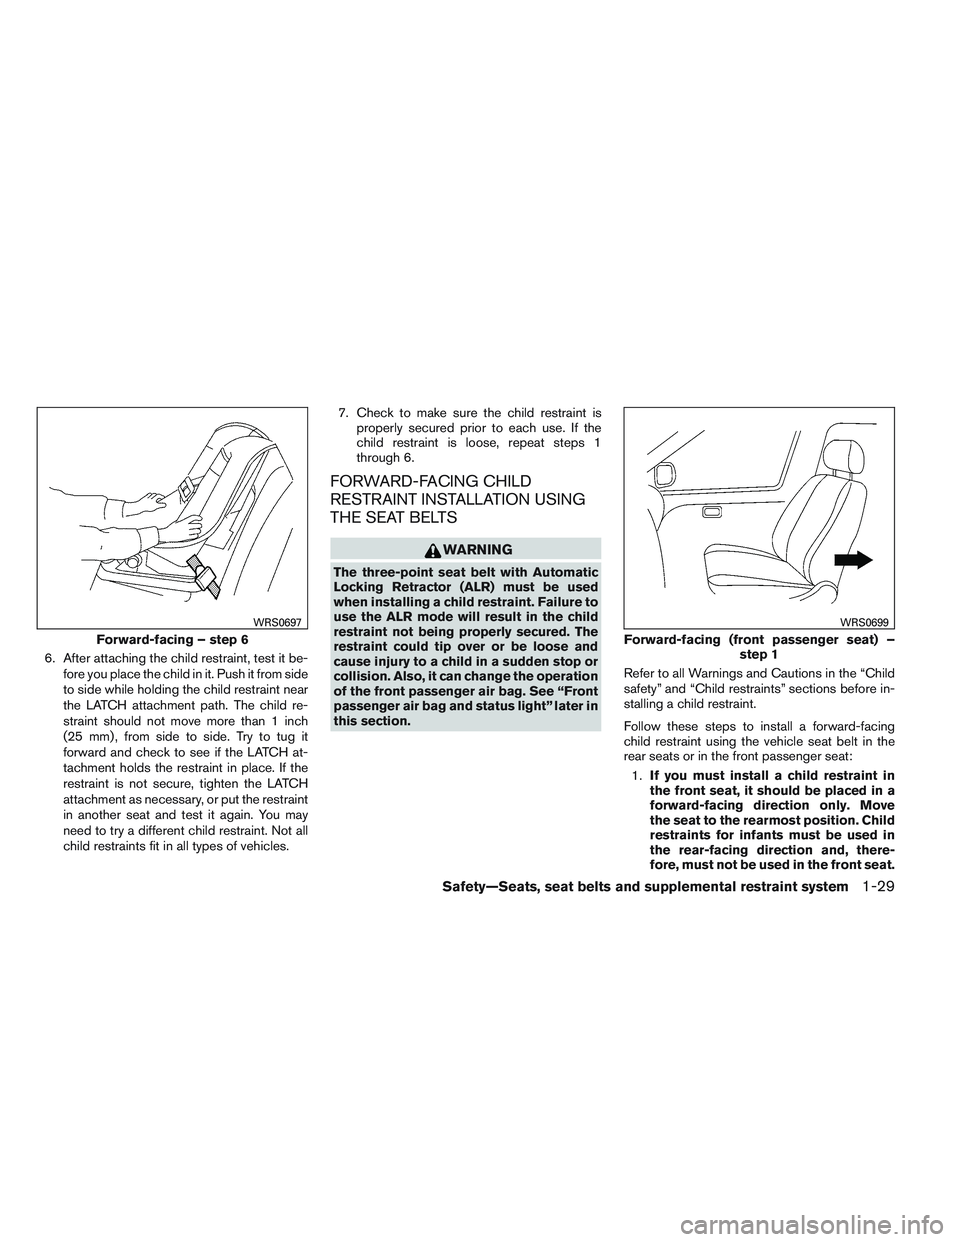 NISSAN VERSA 2014 Service Manual 6. After attaching the child restraint, test it be-fore you place the child in it. Push it from side
to side while holding the child restraint near
the LATCH attachment path. The child re-
straint sho